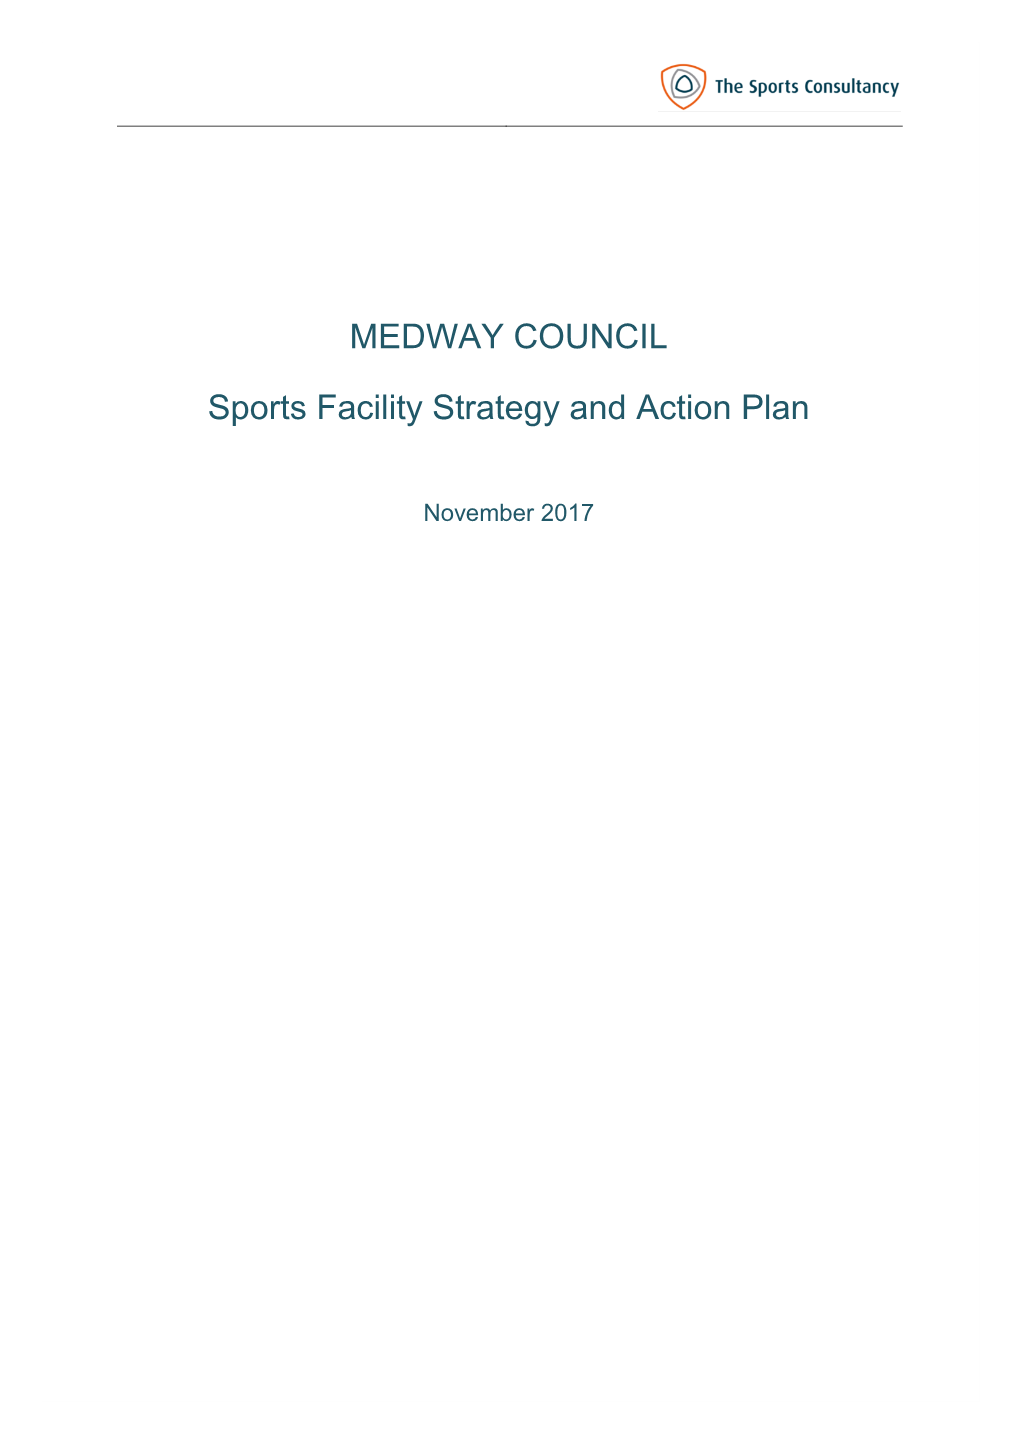 Download Medway Council Sports Facility Strategy and Action Plan